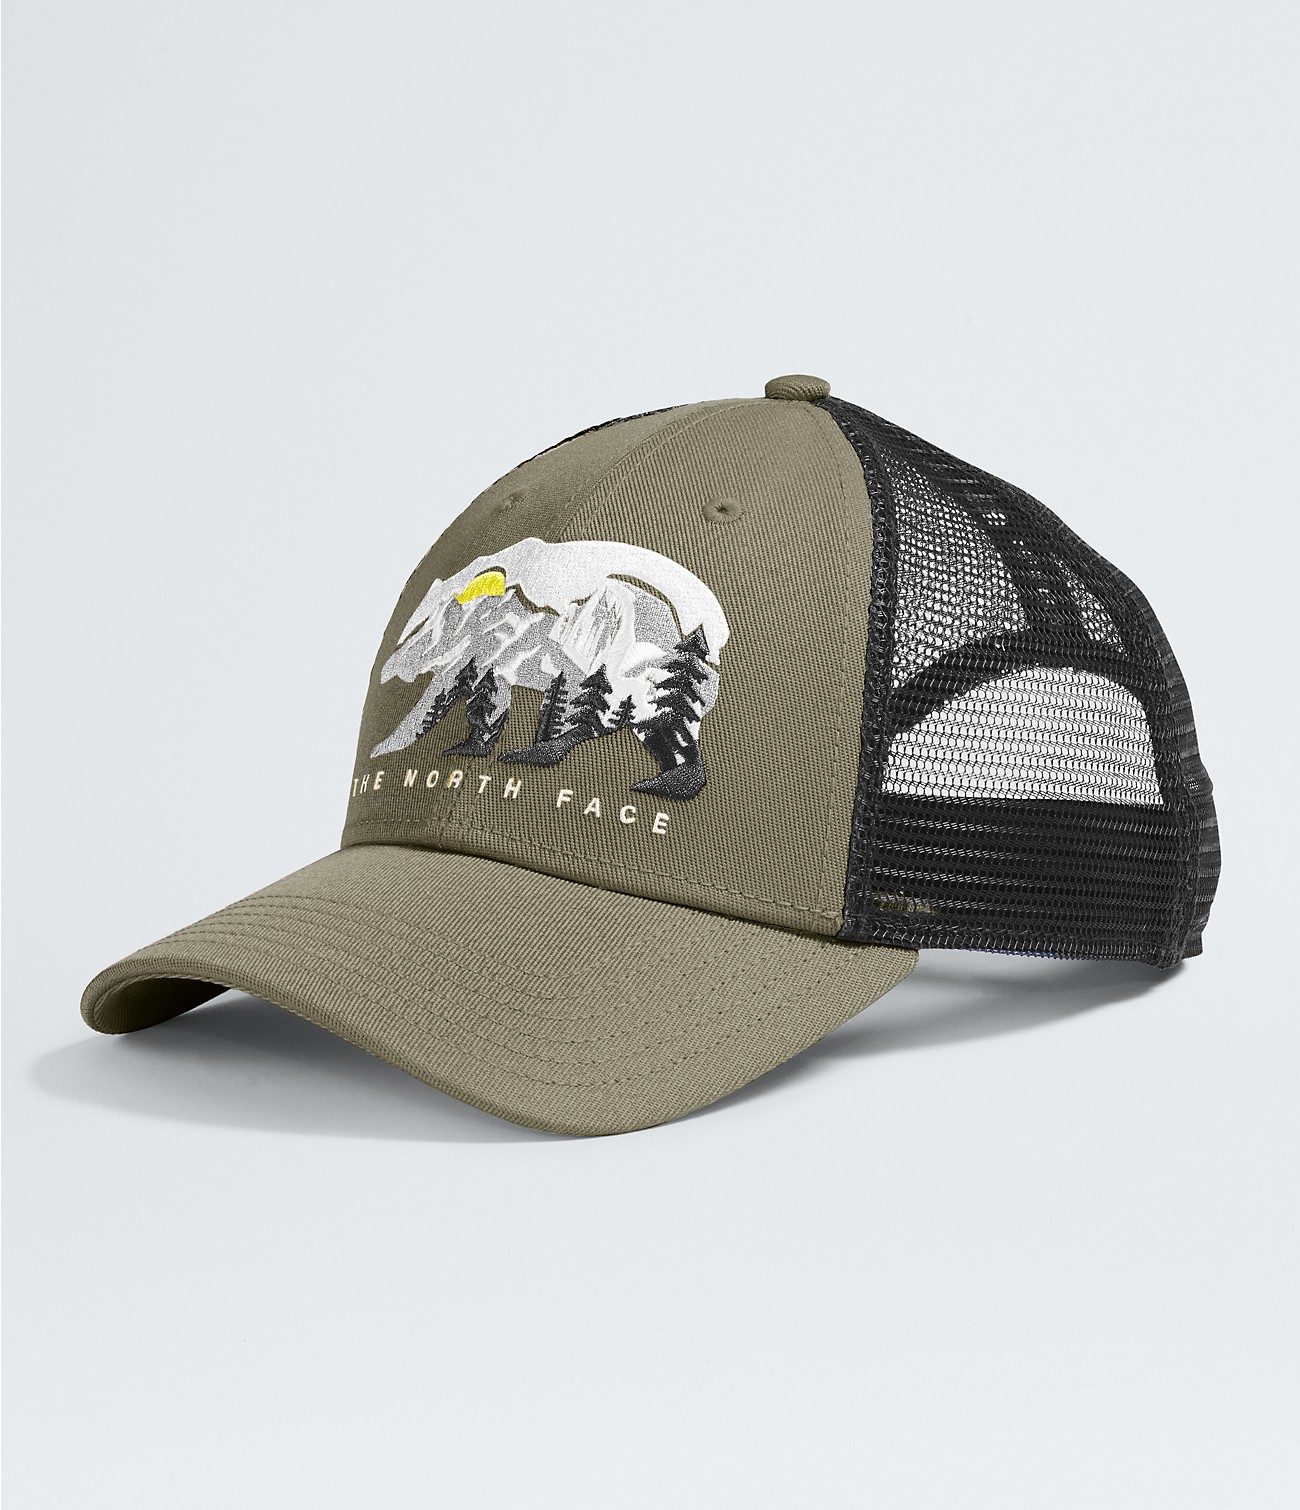 Embroidered Mudder Trucker Hat | The North Face